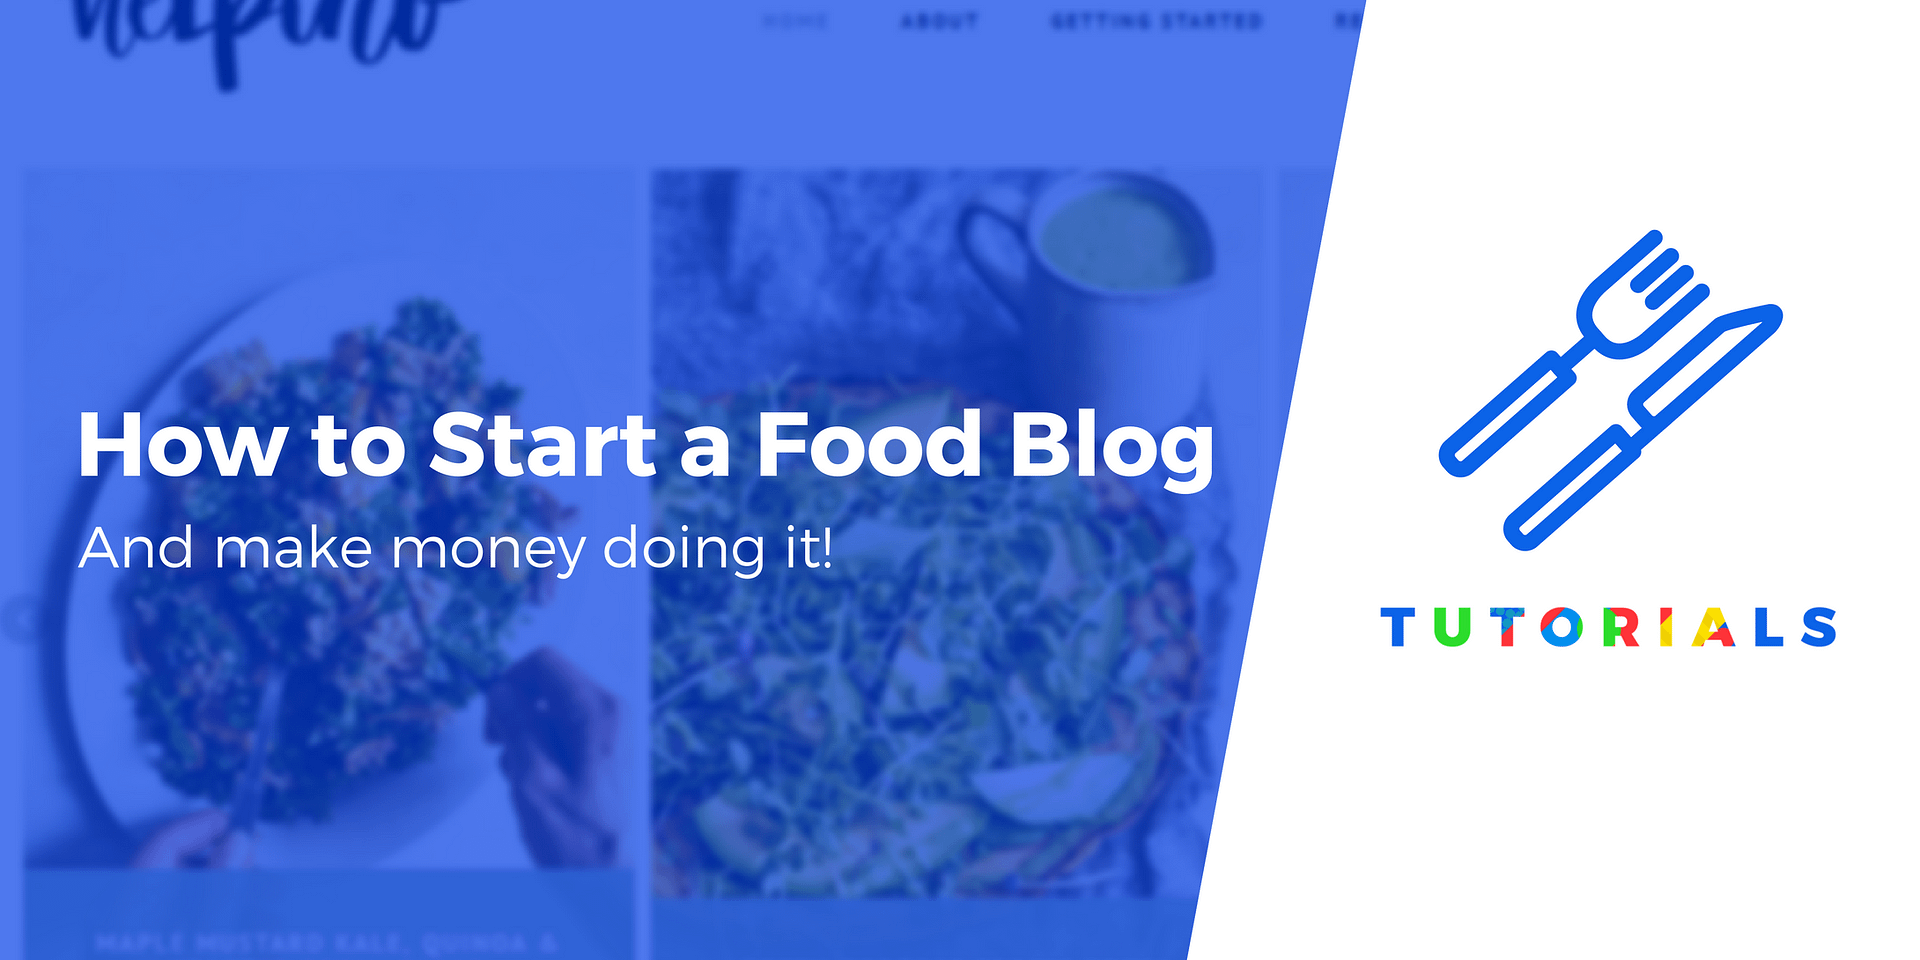 Email Copywriting for Bloggers, Food Bloggers + Content Creators